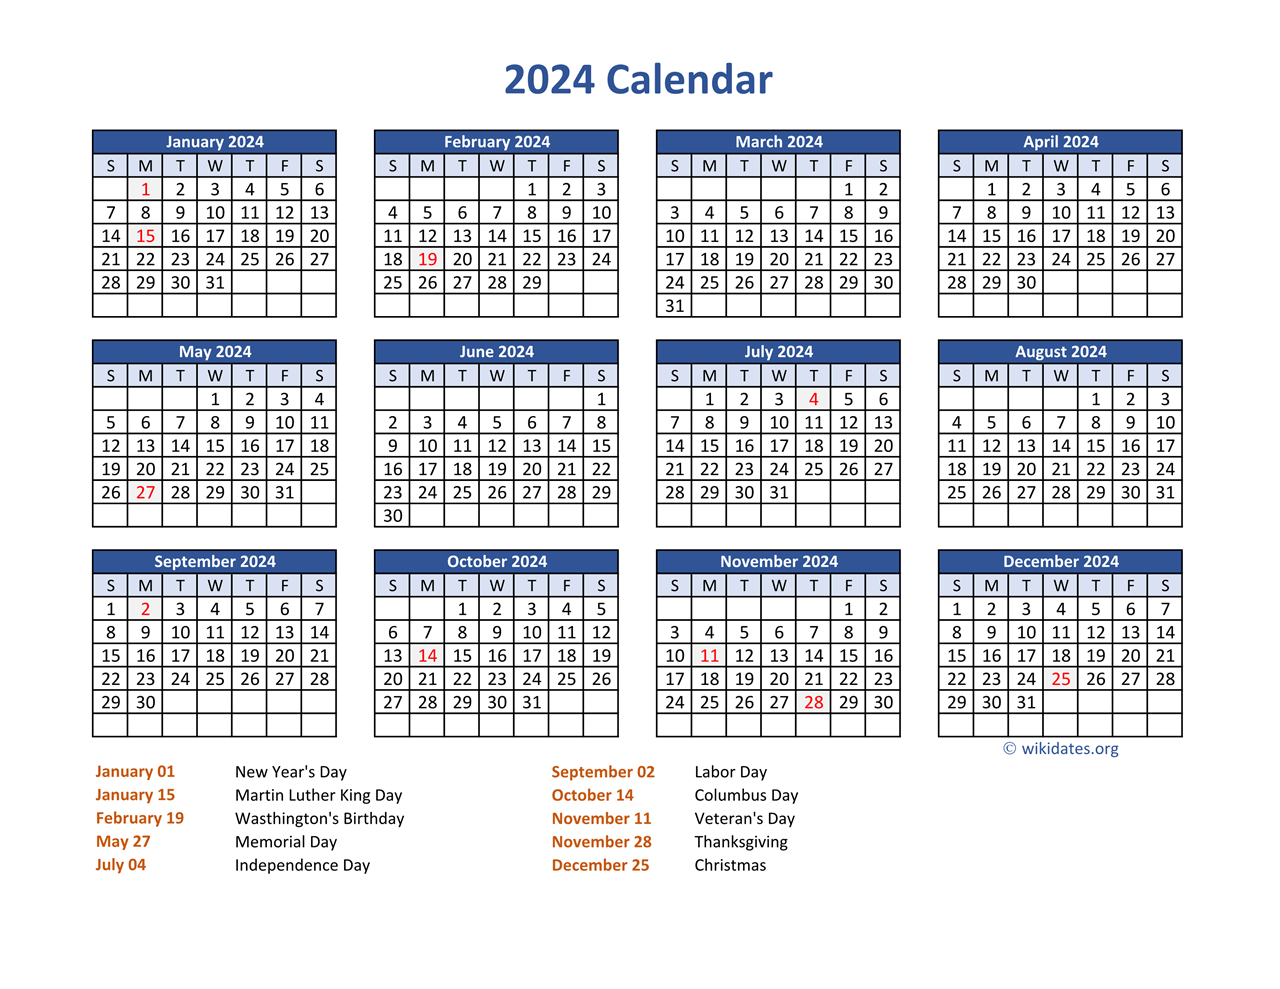 Pdf Calendar 2024 With Federal Holidays | Wikidates for Printable Yearly Calendar 2024 With Holidays